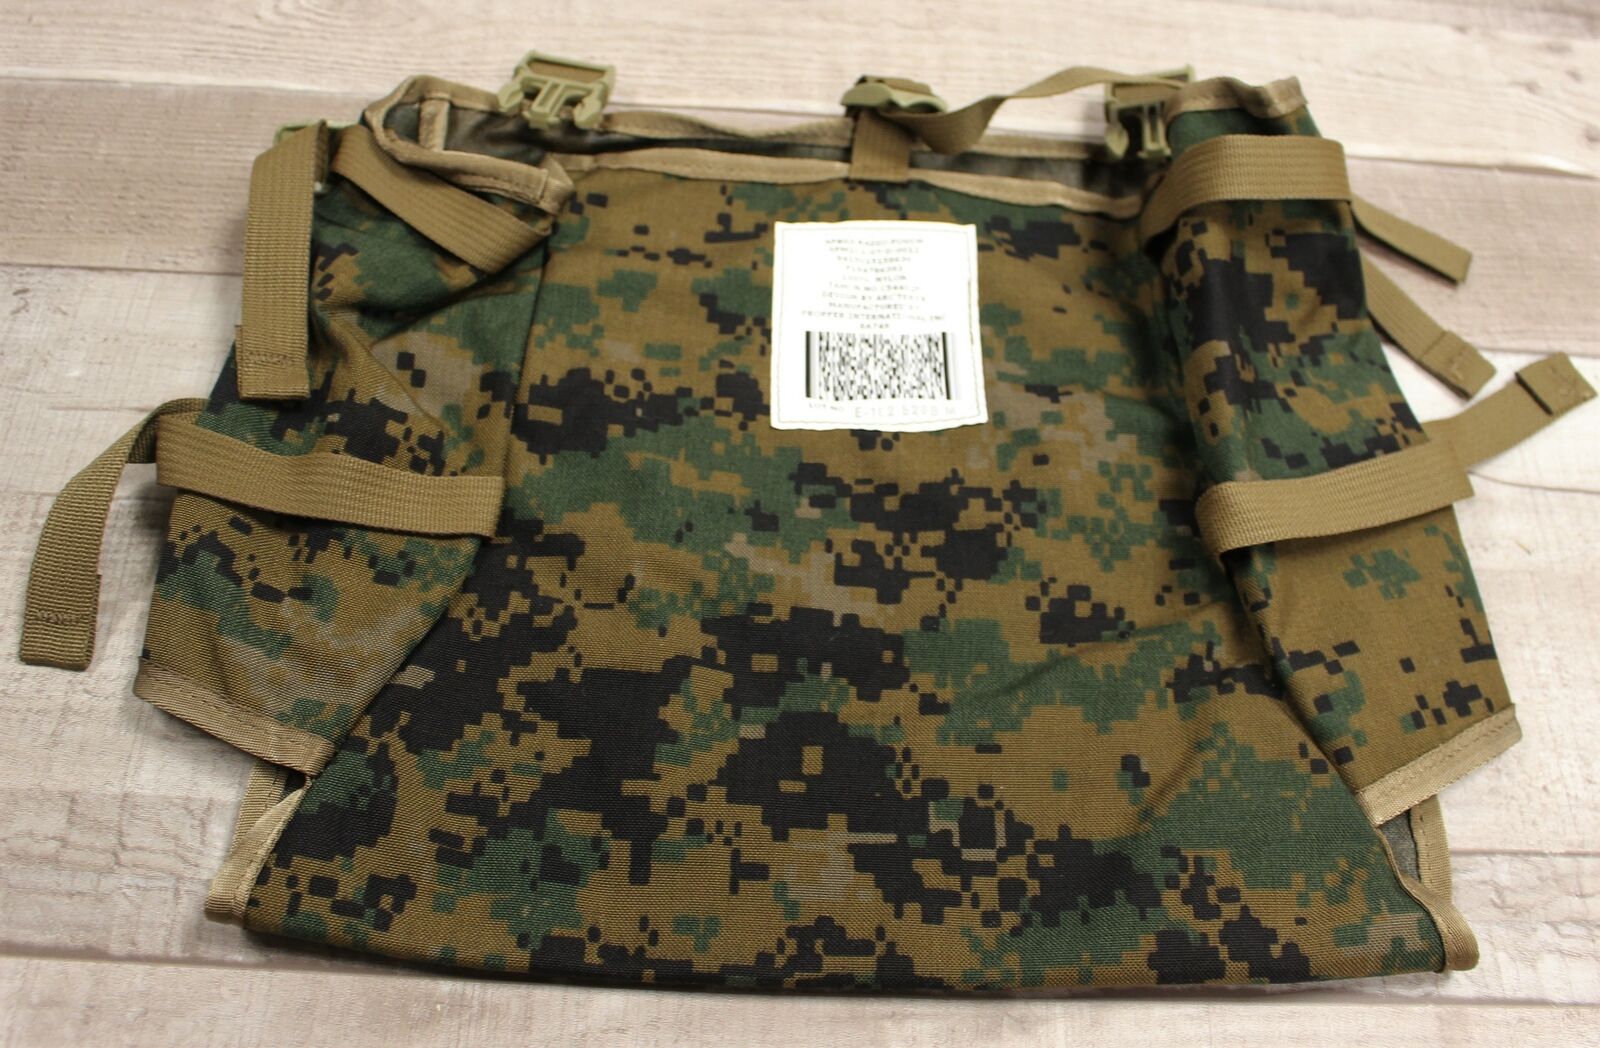 NEW USMC MARPAT Gen 2 Radio Pouch Utility Pouch for ILBE Main Pack, Tan